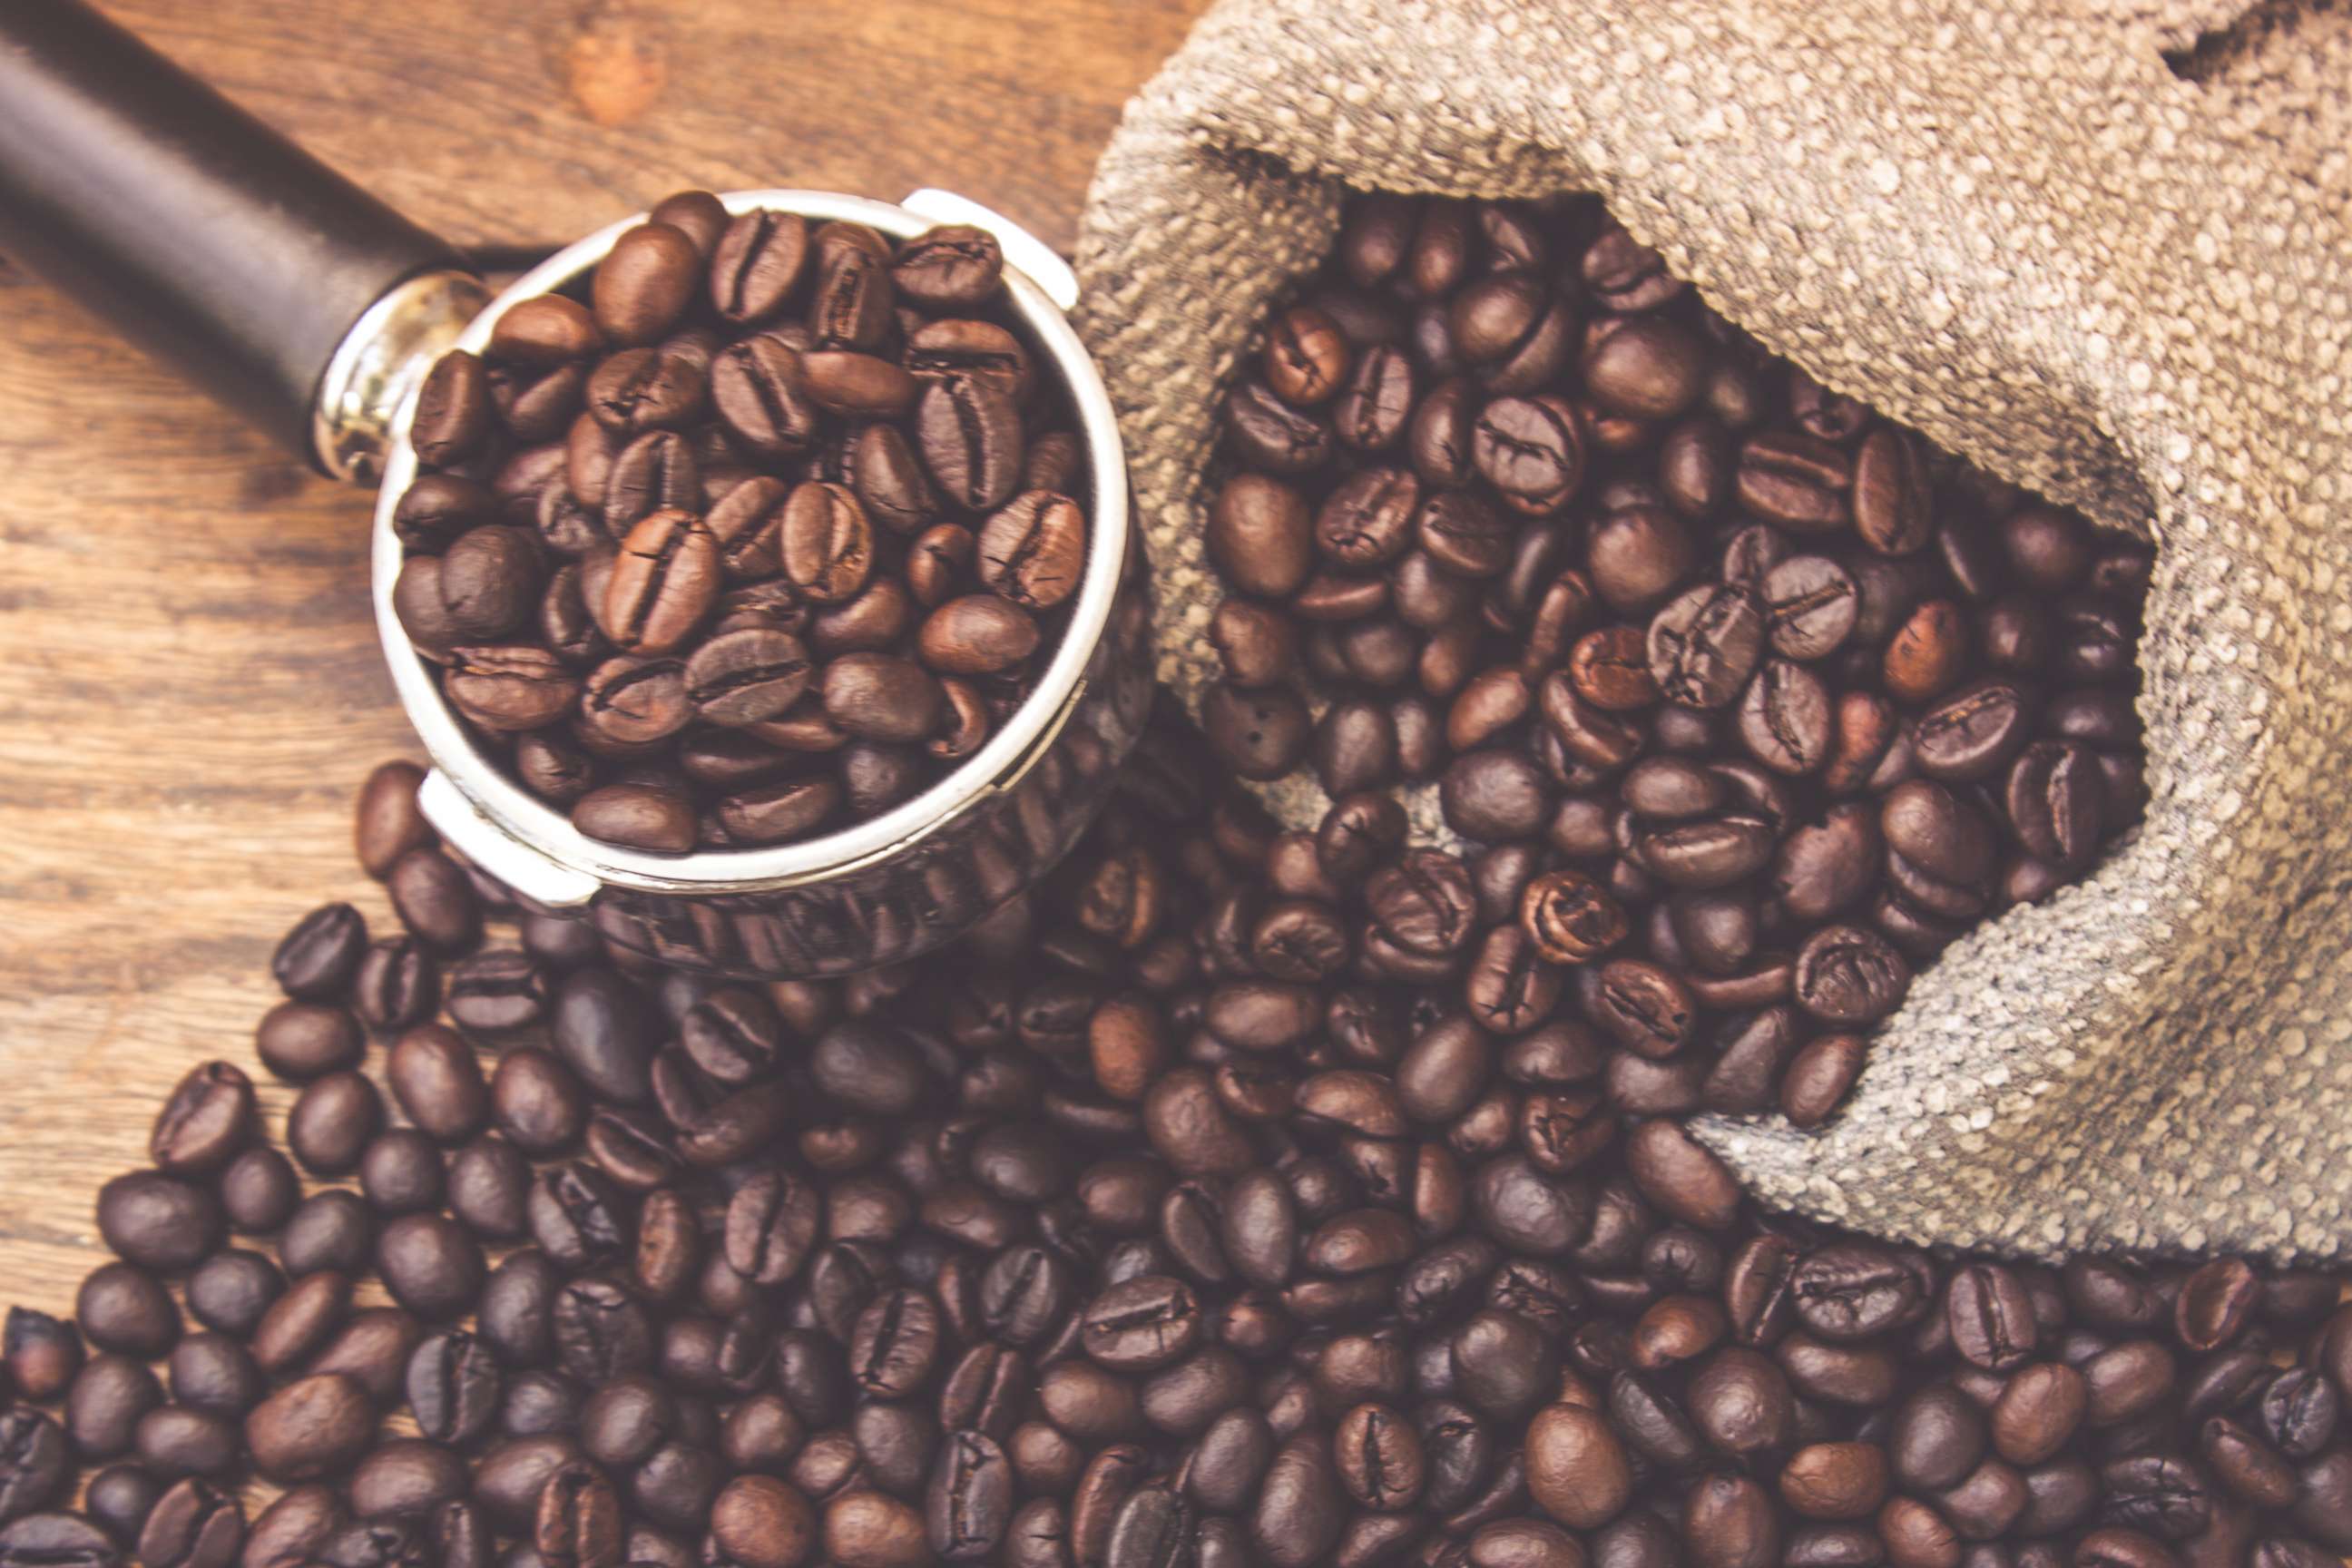 PHOTO: A close-up of roasted coffee beans is pictured in this undated stock photo.